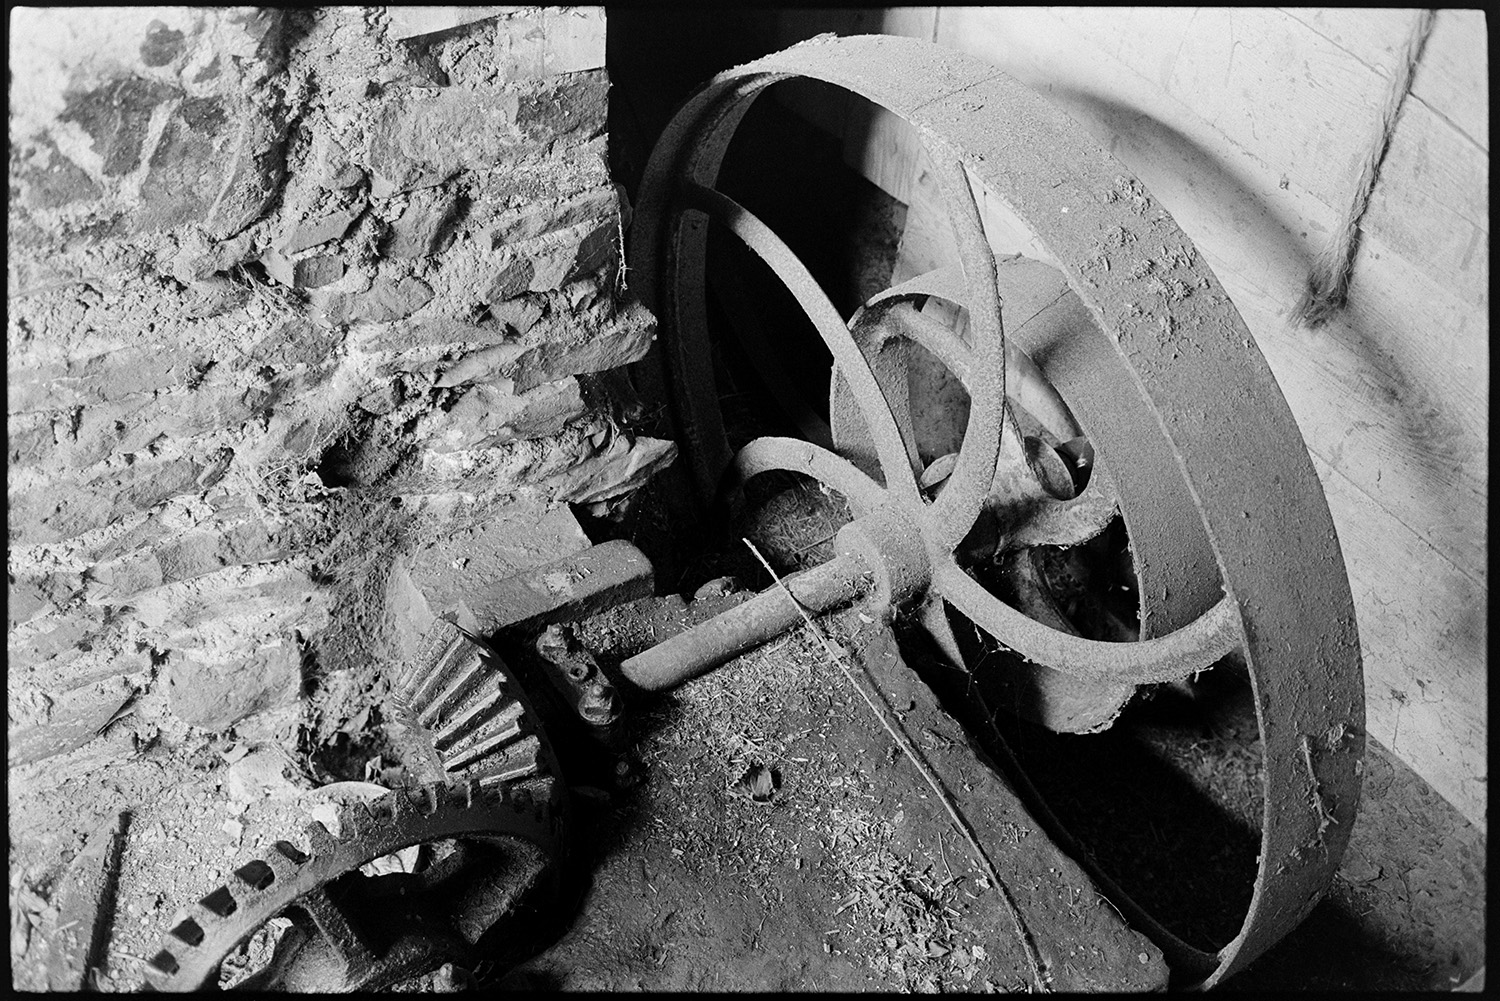 Pulley wheels and cogs of mill undershot construction.
[Pulley wheels and the cogs of an old mill undershot construction section at West Chapple Farm near Winkleigh.]